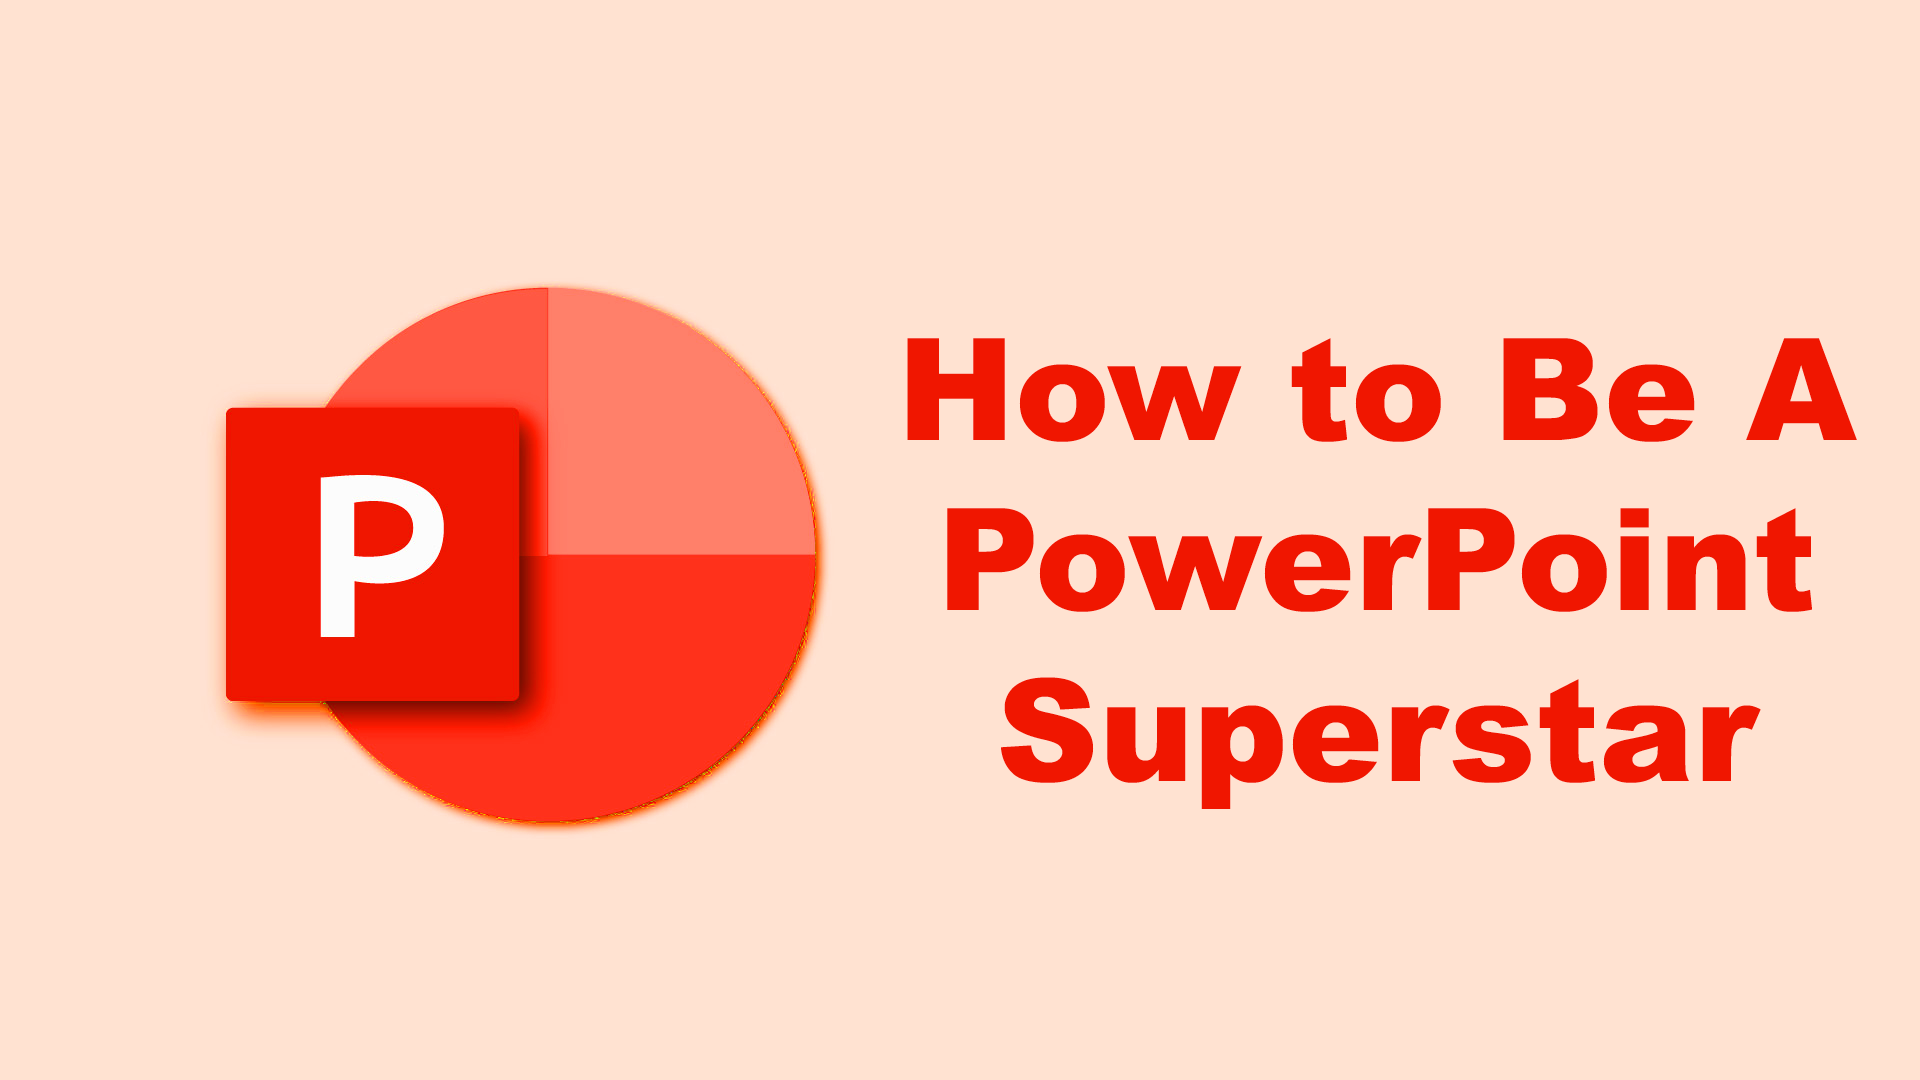 How to Build a PowerPoint Presentation